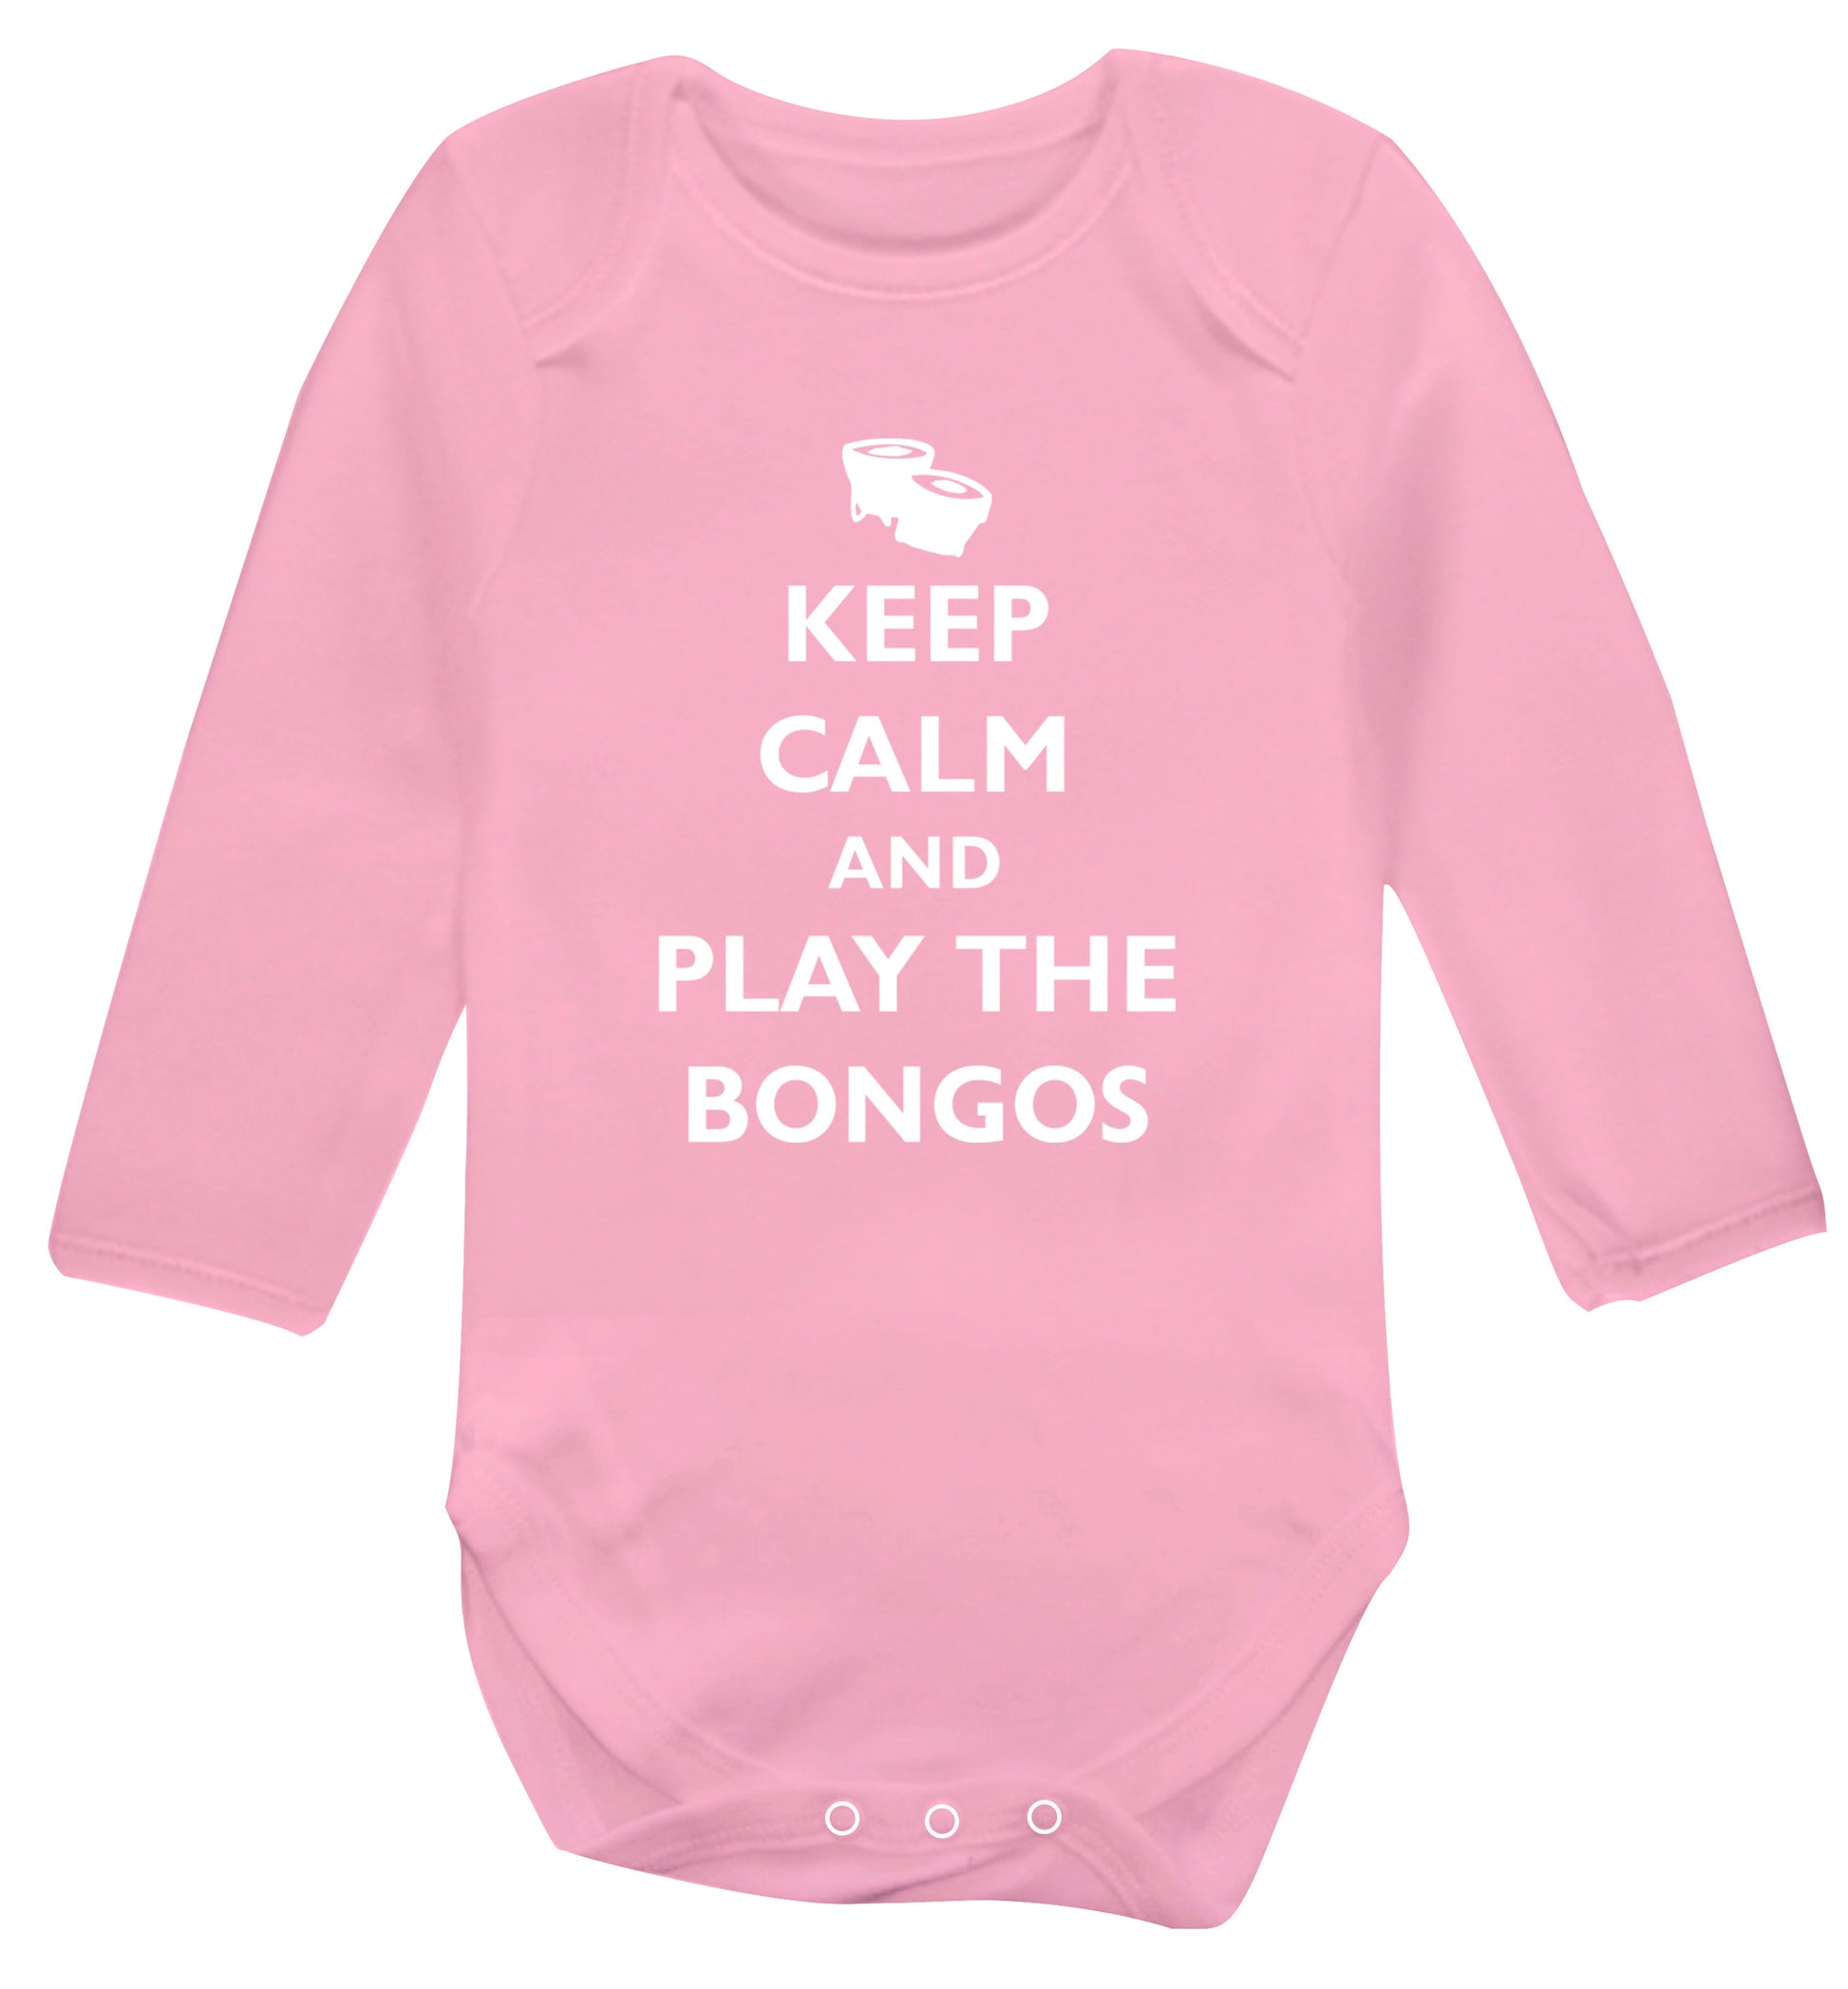 Keep calm and play the bongos Baby Vest long sleeved pale pink 6-12 months